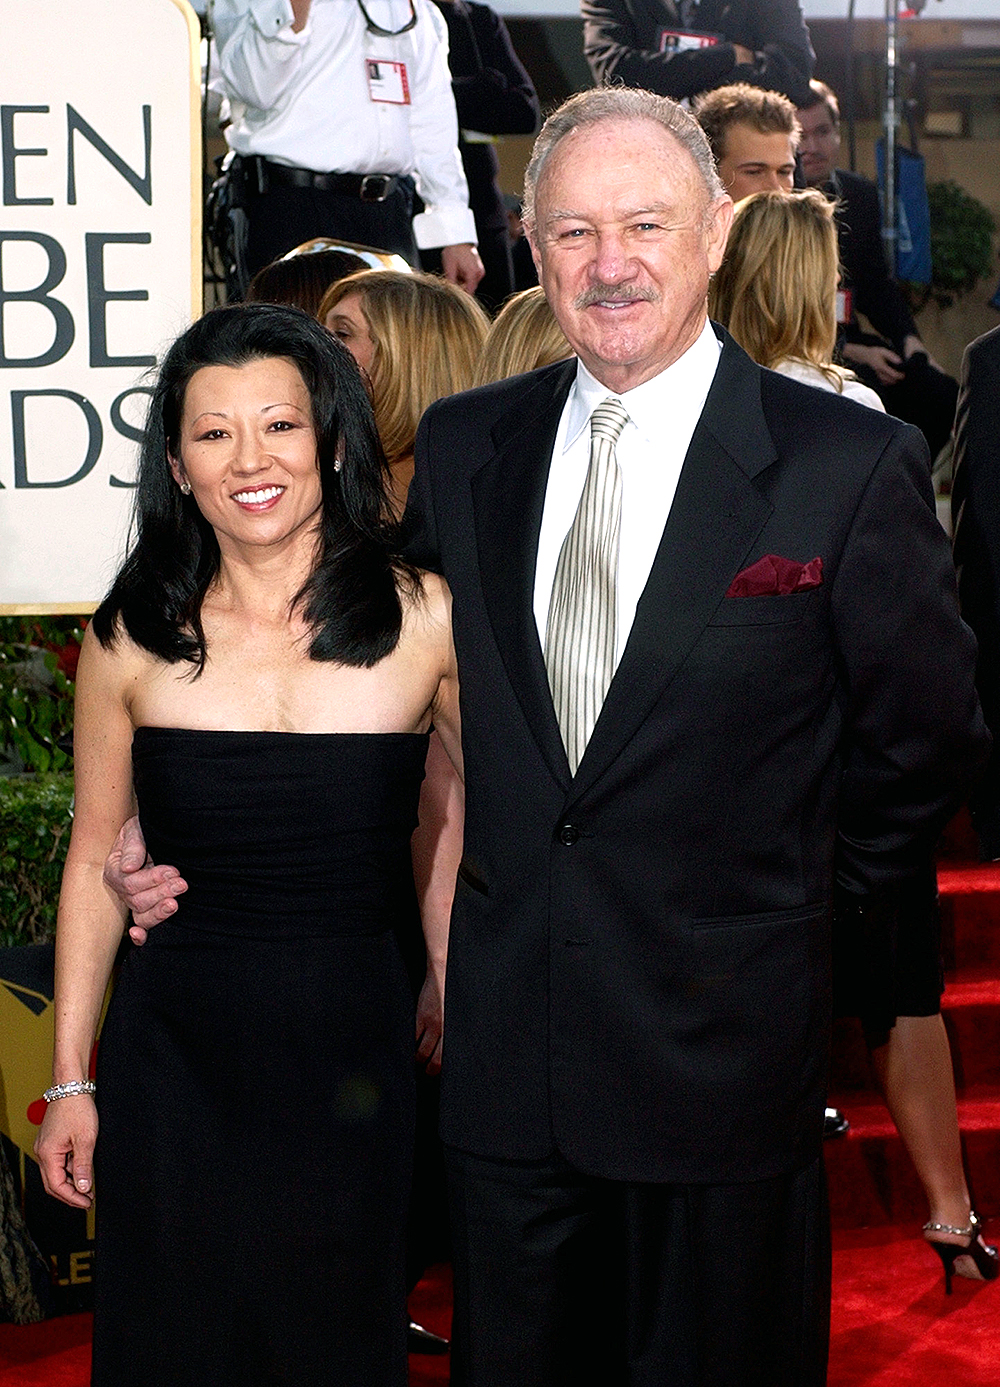 HACKMAN ARAKAWA Actor Gene Hackman arrives with his wife, Betsy Arakawa, for the 60th Annual Golden Globe Awards in Beverly Hills, Calif., where he will receive the Hollywood Foreign Press Association's Cecil B deMille Award for outstanding contributions to the world of entertainmentGOLDEN GLOBES, BEVERLY HILLS, USA